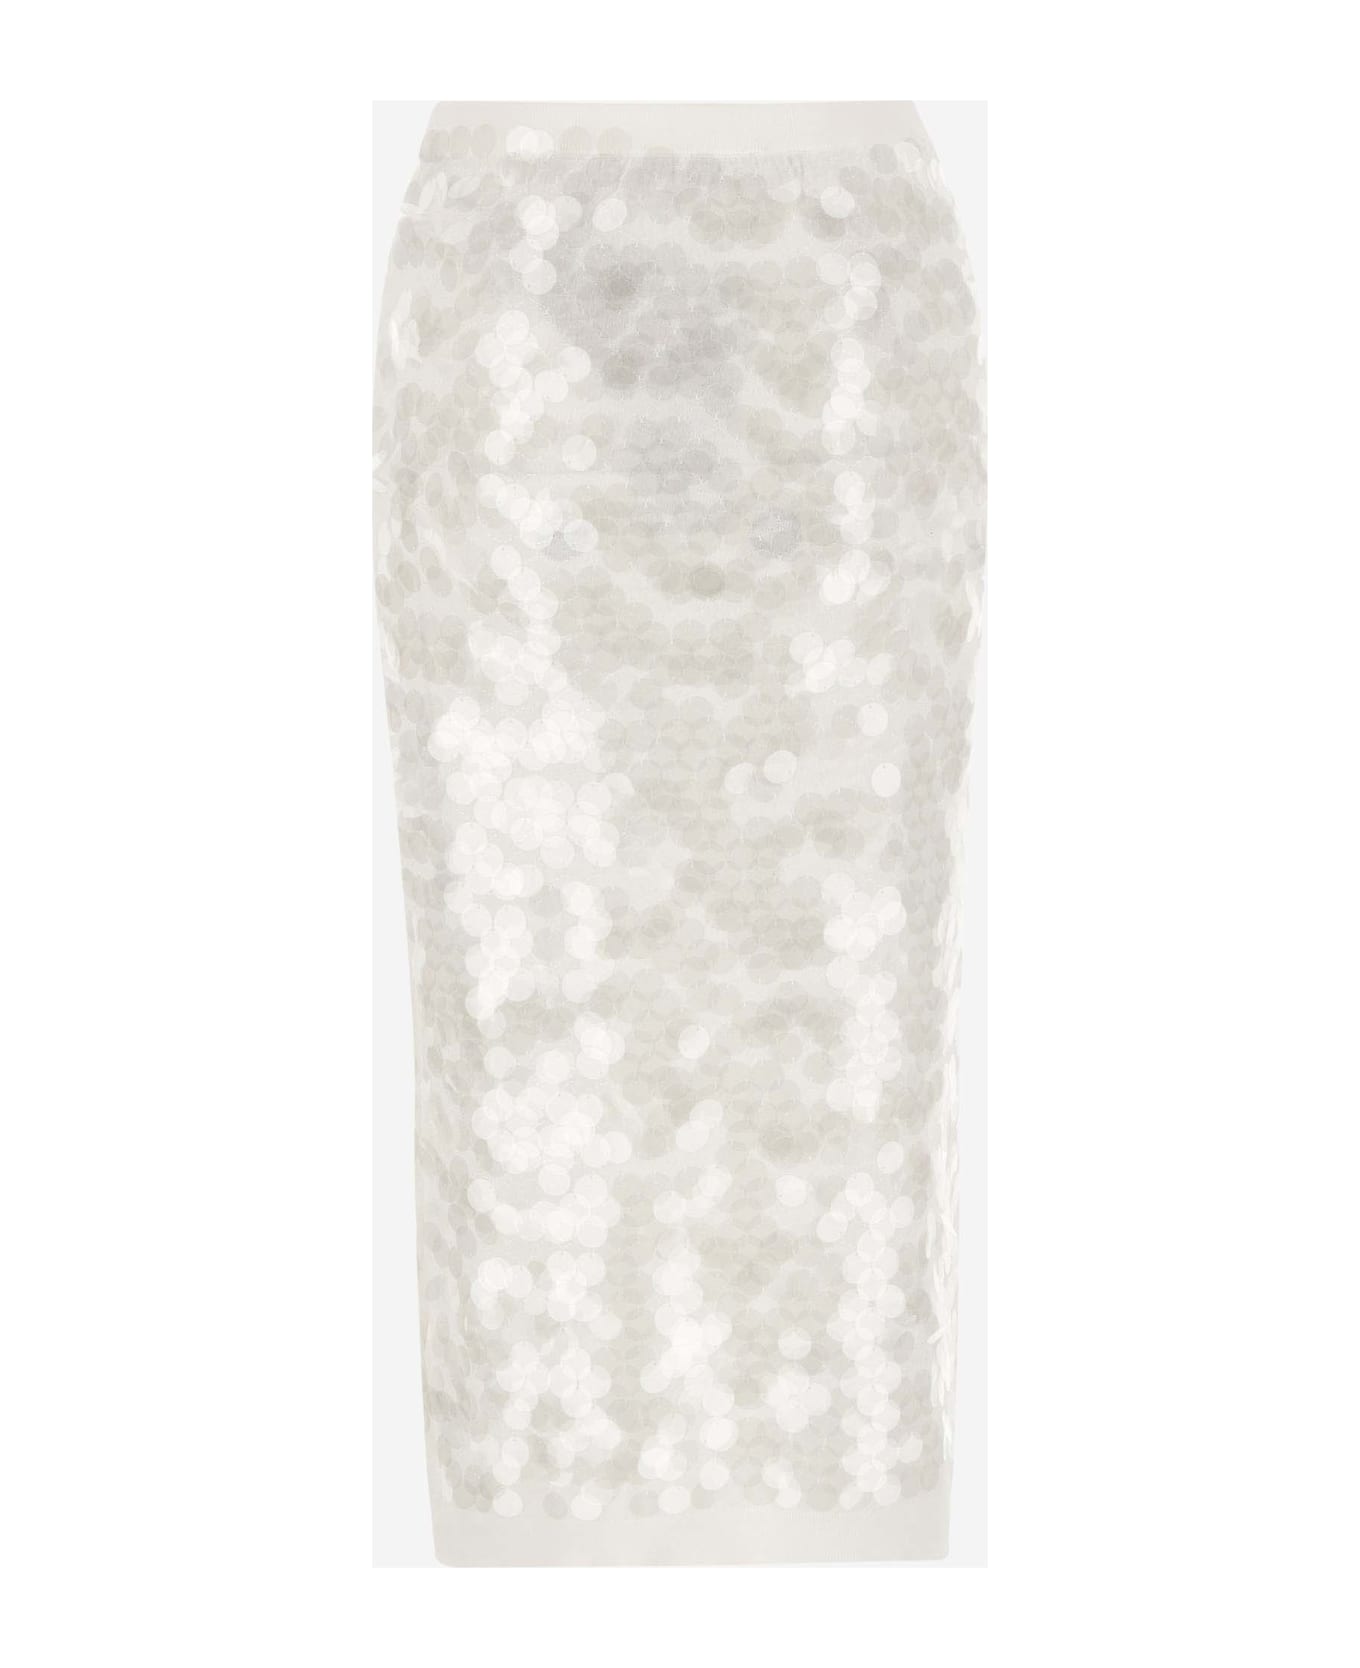 N.21 Sequined Cotton Skirt - White